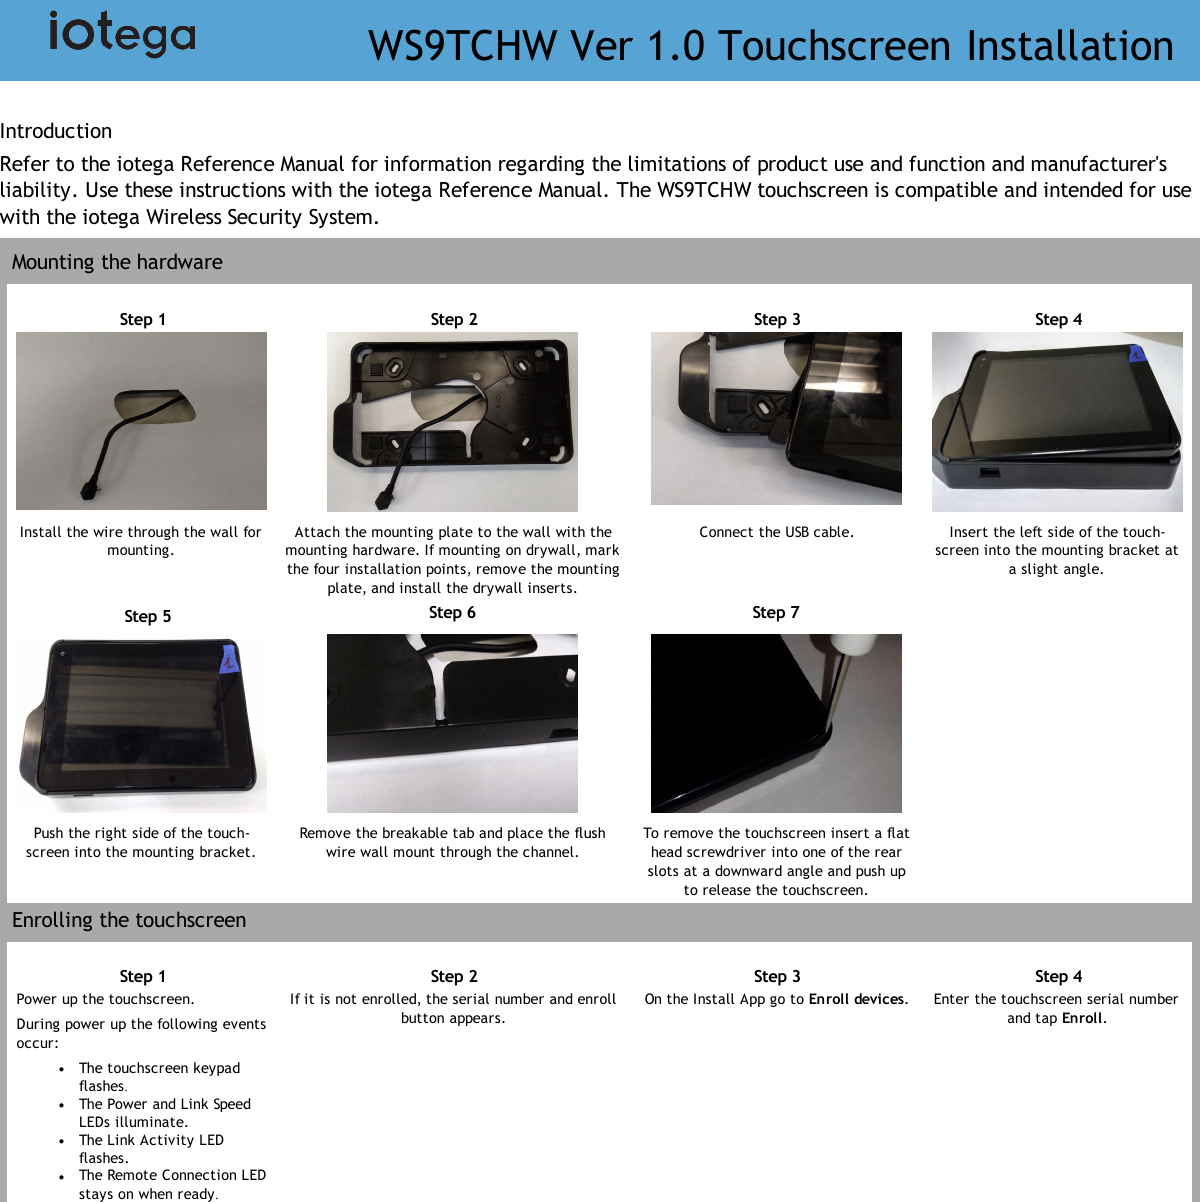 IntroductionRefer to the iotega Reference Manual for information regarding the limitations of product use and function and manufacturer&apos;sliability. Use these instructions with the iotega Reference Manual. The WS9TCHW touchscreen is compatible and intended for usewith the iotega Wireless Security System.Mounting the hardwareStep 1 Step 2 Step 3 Step 4Install the wire through the wall formounting.Attach the mounting plate to the wall with themounting hardware. If mounting on drywall, markthe four installation points, remove the mountingplate, and install the drywall inserts.Connect the USB cable. Insert the left side of the touch-screen into the mounting bracket ata slight angle.Step 5 Step 6 Step 7Push the right side of the touch-screen into the mounting bracket.Remove the breakable tab and place the flushwire wall mount through the channel.To remove the touchscreen insert a flathead screwdriver into one of the rearslots at a downward angle and push upto release the touchscreen.Enrolling the touchscreenStep 1 Step 2 Step 3 Step 4Power up the touchscreen.During power up the following eventsoccur:lThe touchscreen keypadflashes.lThe Power and Link SpeedLEDs illuminate.lThe Link Activity LEDflashes.lThe Remote Connection LEDstays on when ready.If it is not enrolled, the serial number and enrollbutton appears.On the Install App go to Enroll devices. Enter the touchscreen serial numberand tap Enroll.WS9TCHW Ver 1.0 Touchscreen Installation